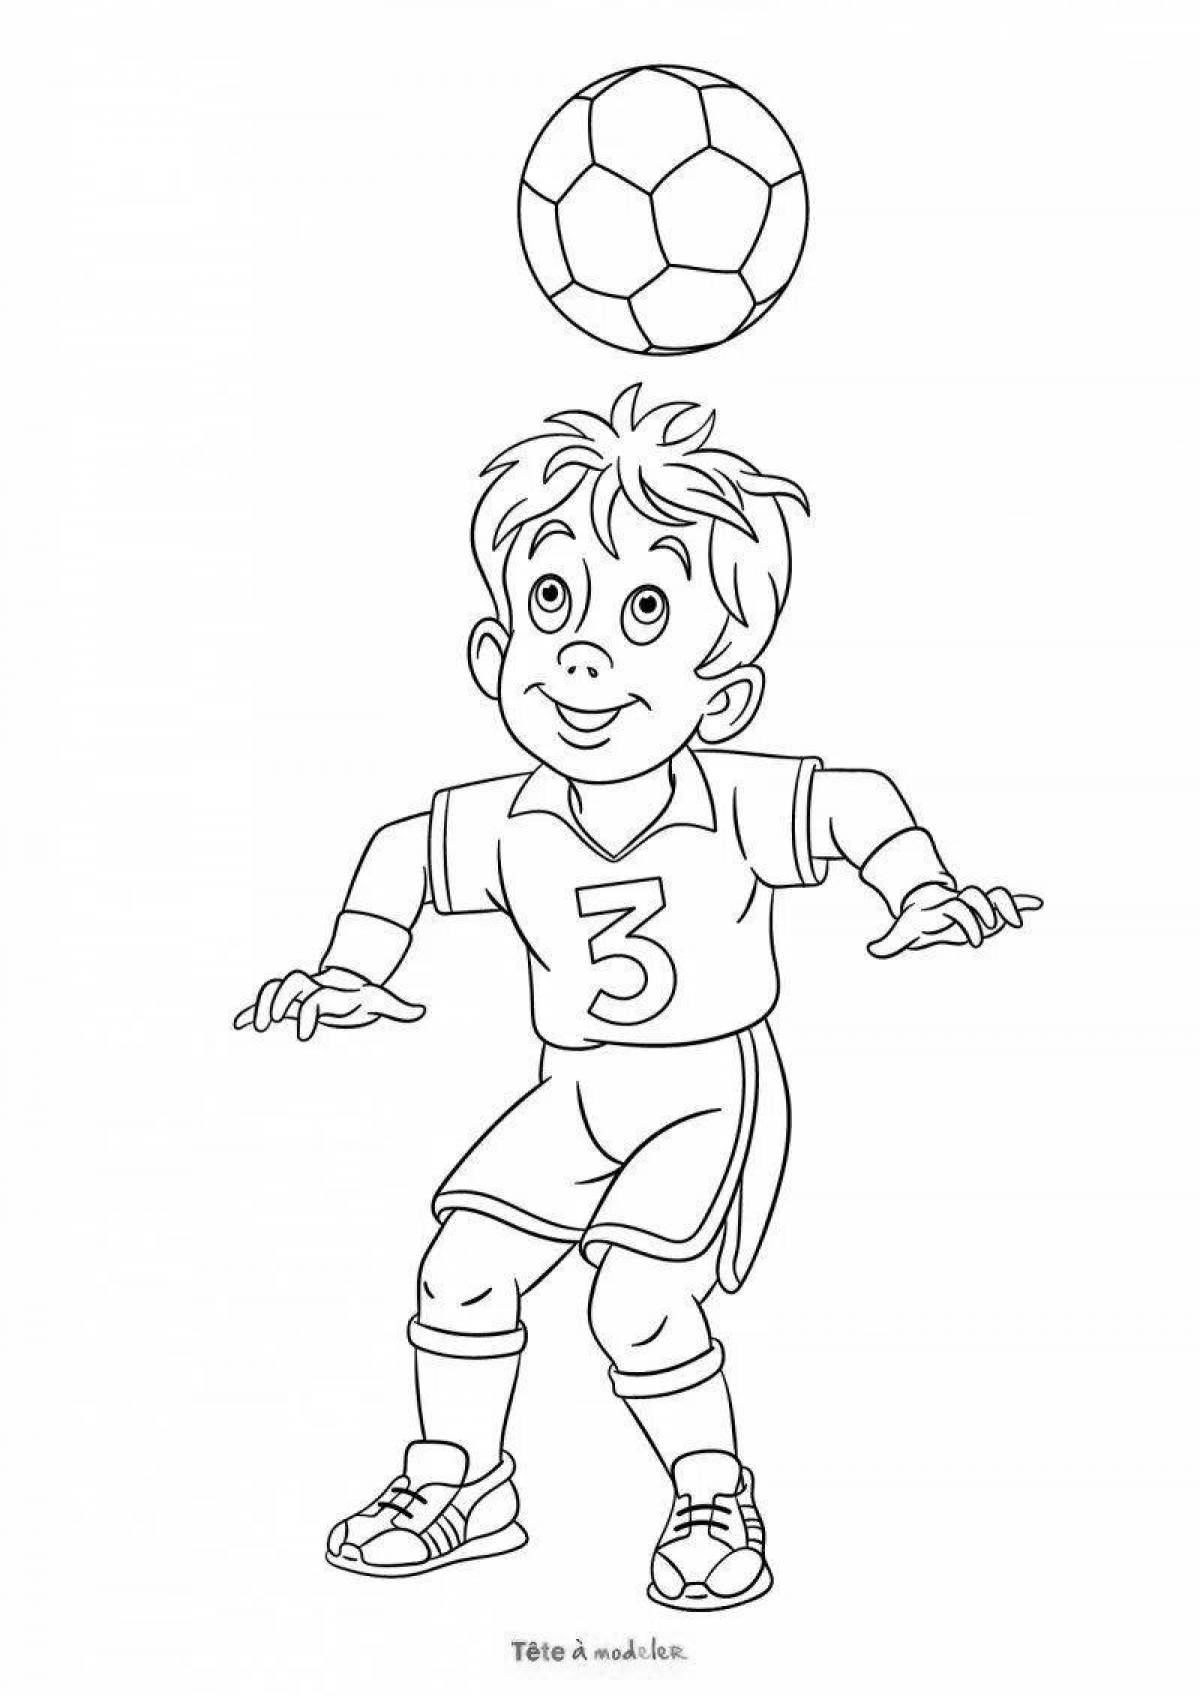 Adorable football player coloring book for kids